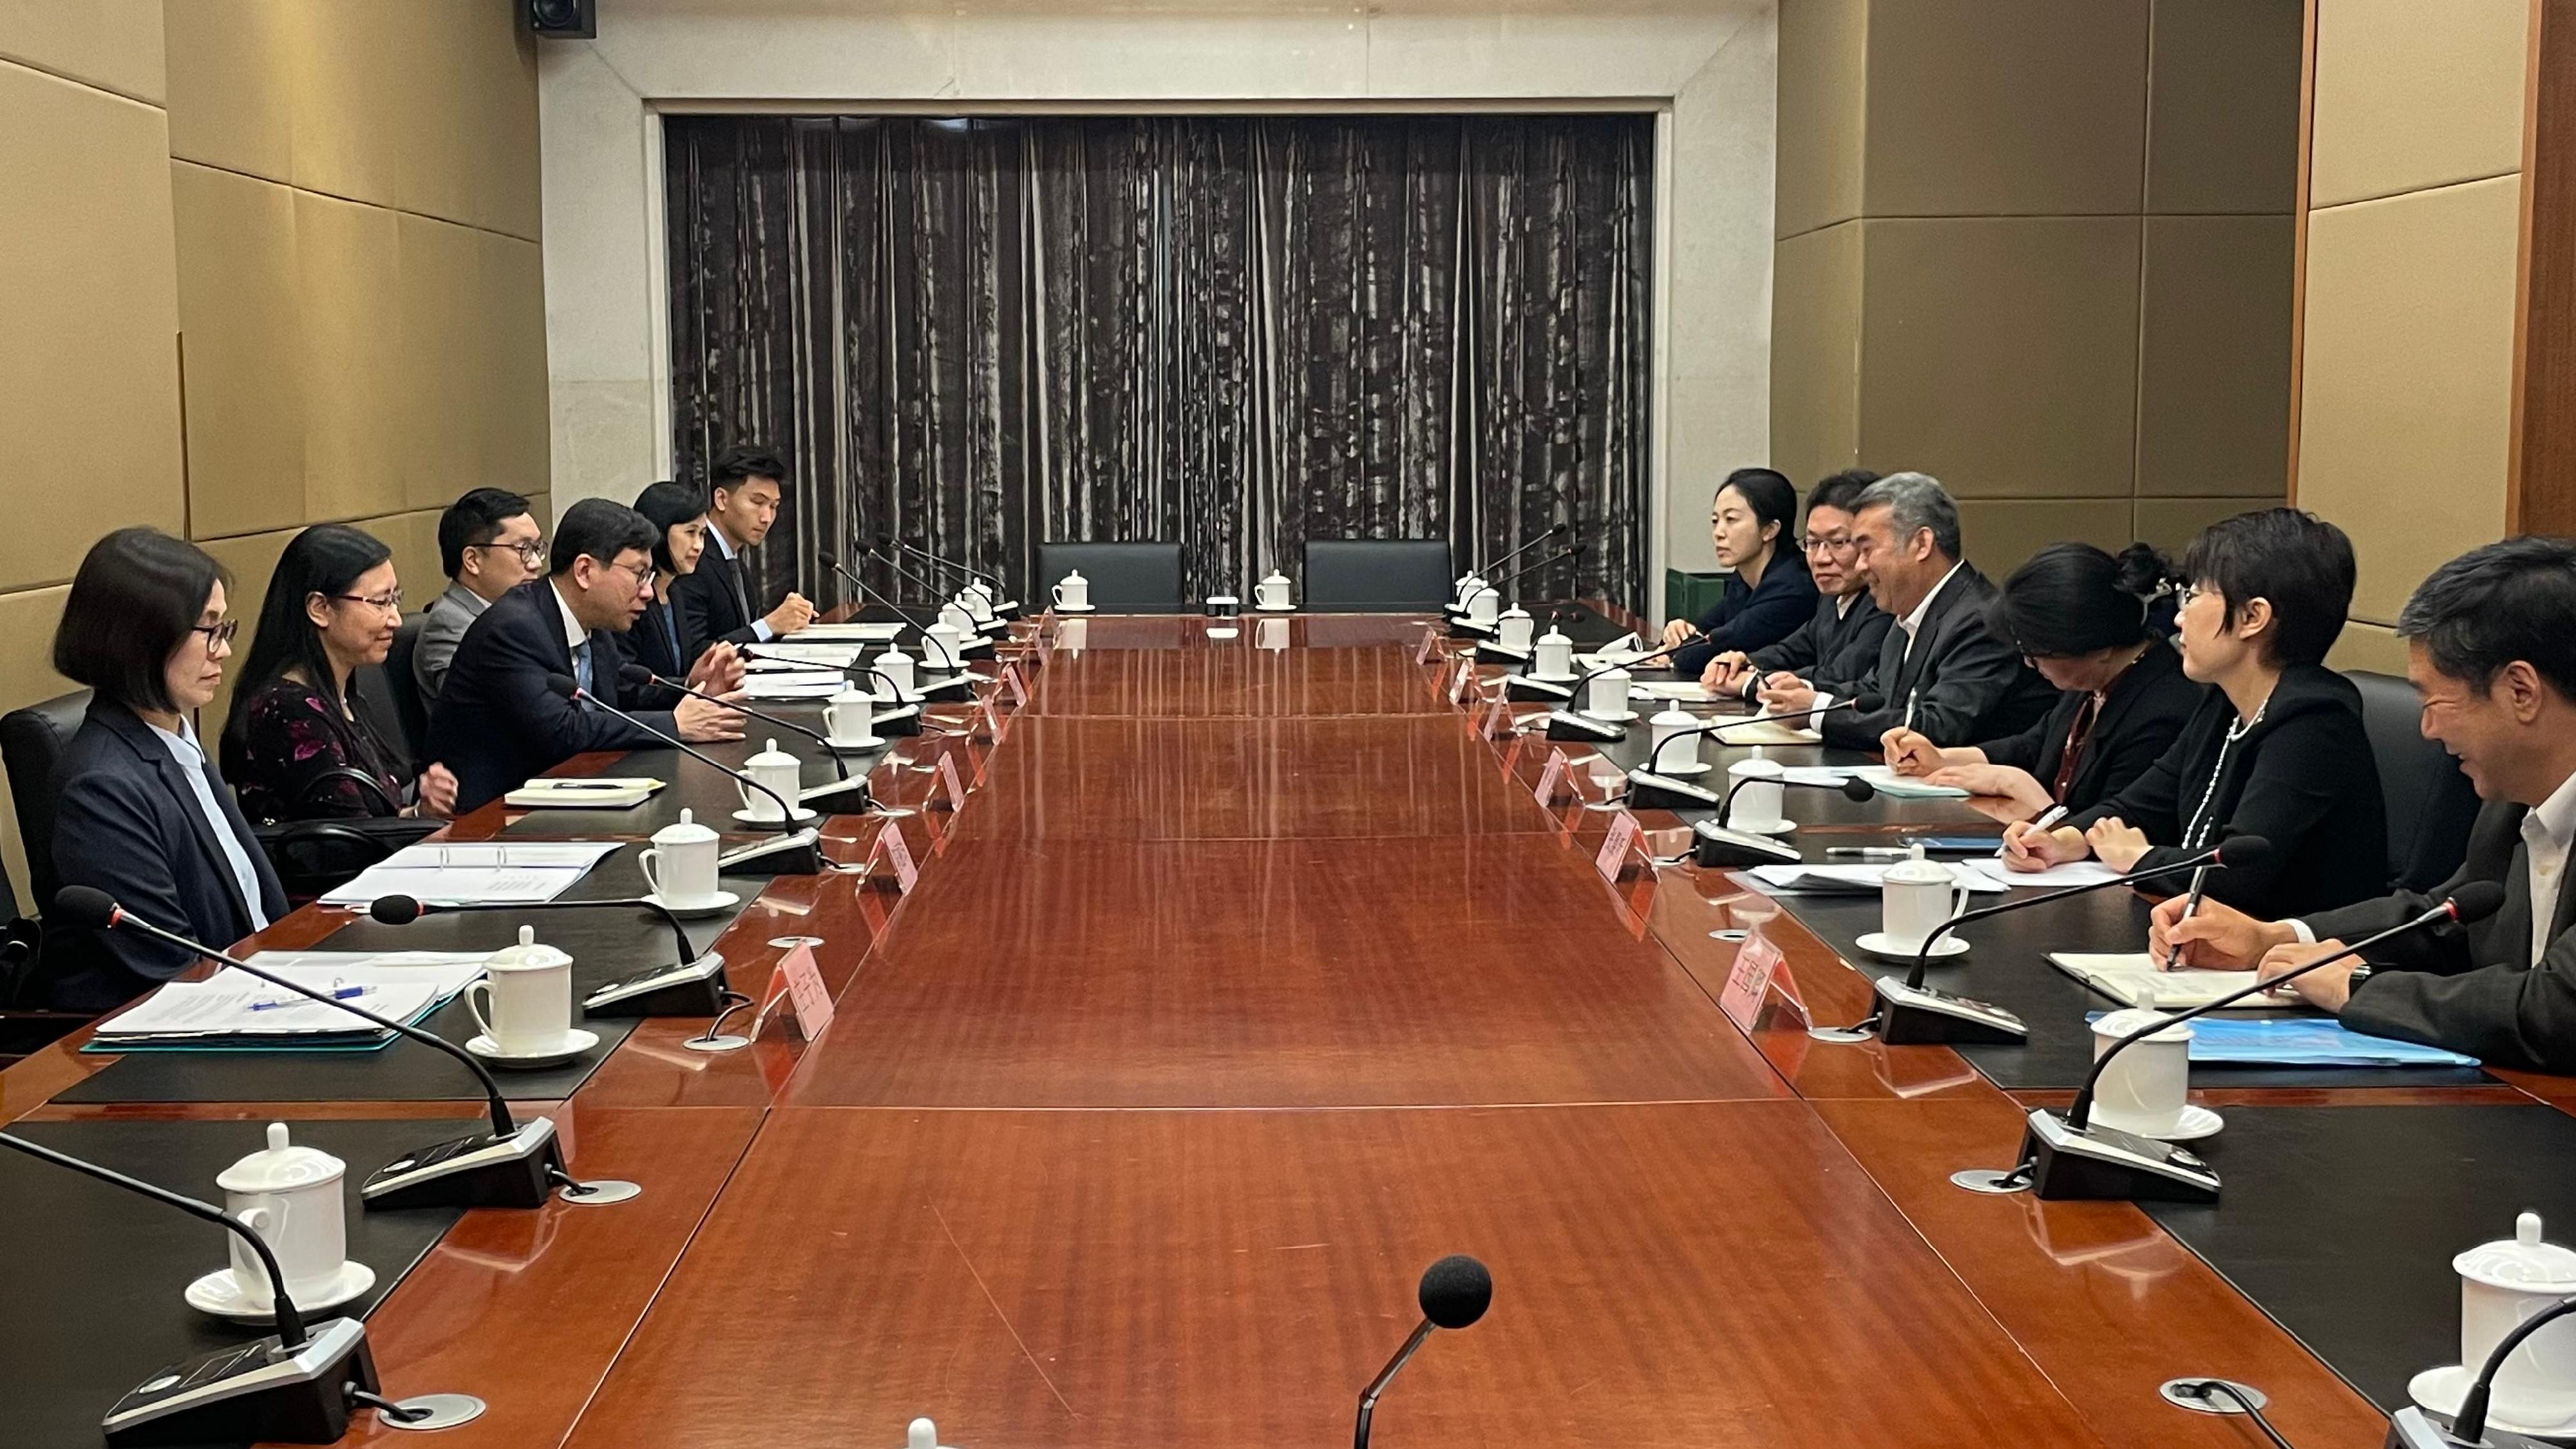 The Secretary for Labour and Welfare, Mr Chris Sun, today (May 8) started his visit in Beijing. The Permanent Secretary for Labour and Welfare, Ms Alice Lau, also joined the visit. Photo shows Mr Sun (third left) meeting with representatives of the All-China Federation of Trade Unions this morning and exchanging views on labour rights issues.